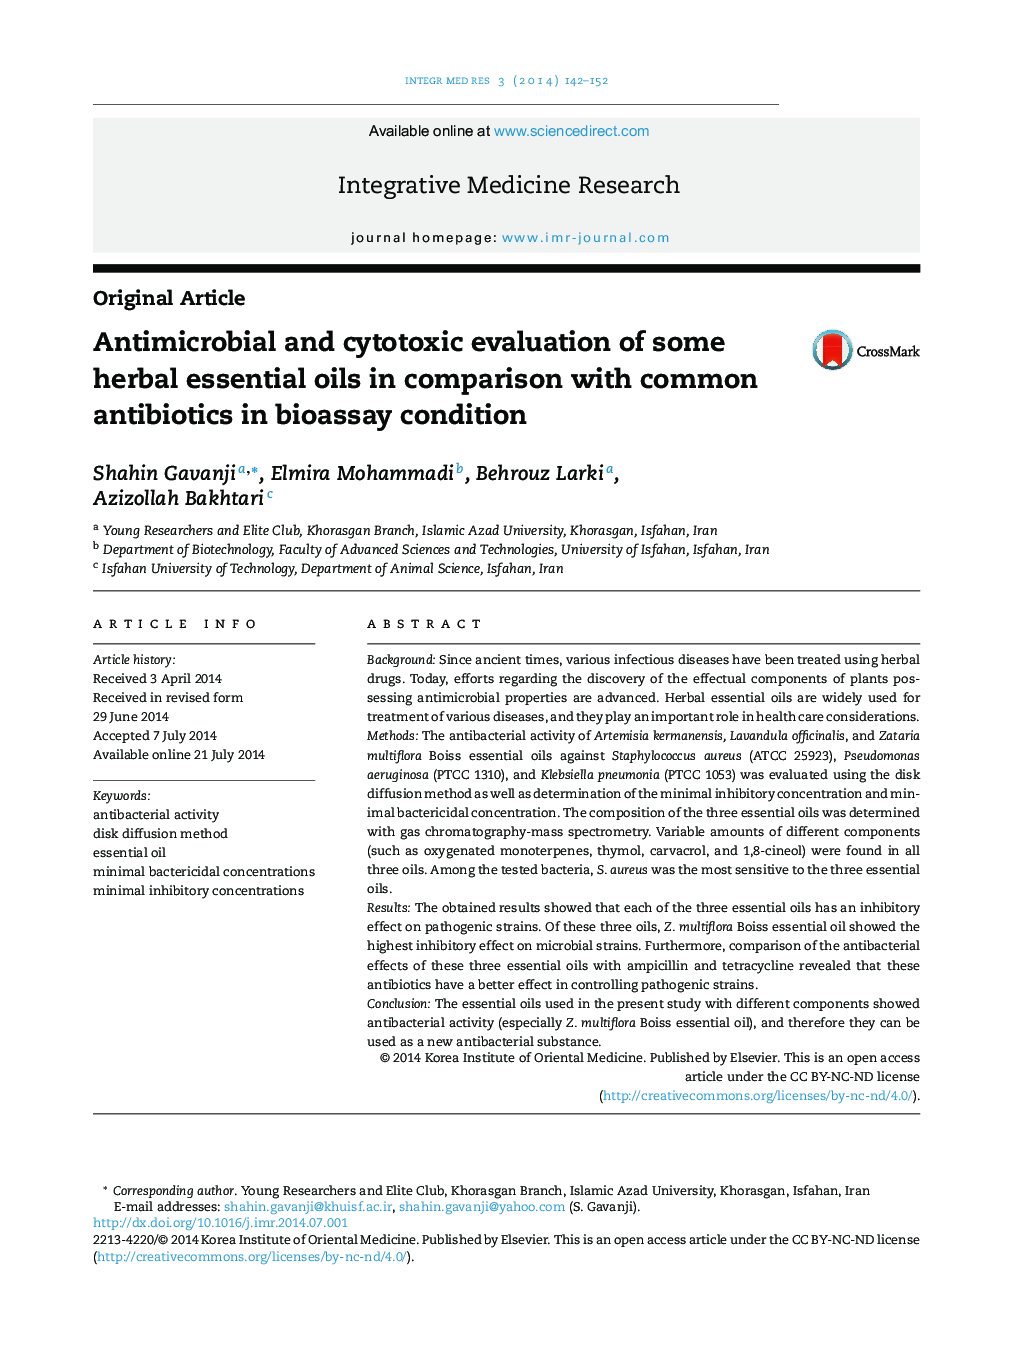 Antimicrobial and cytotoxic evaluation of some herbal essential oils in comparison with common antibiotics in bioassay condition